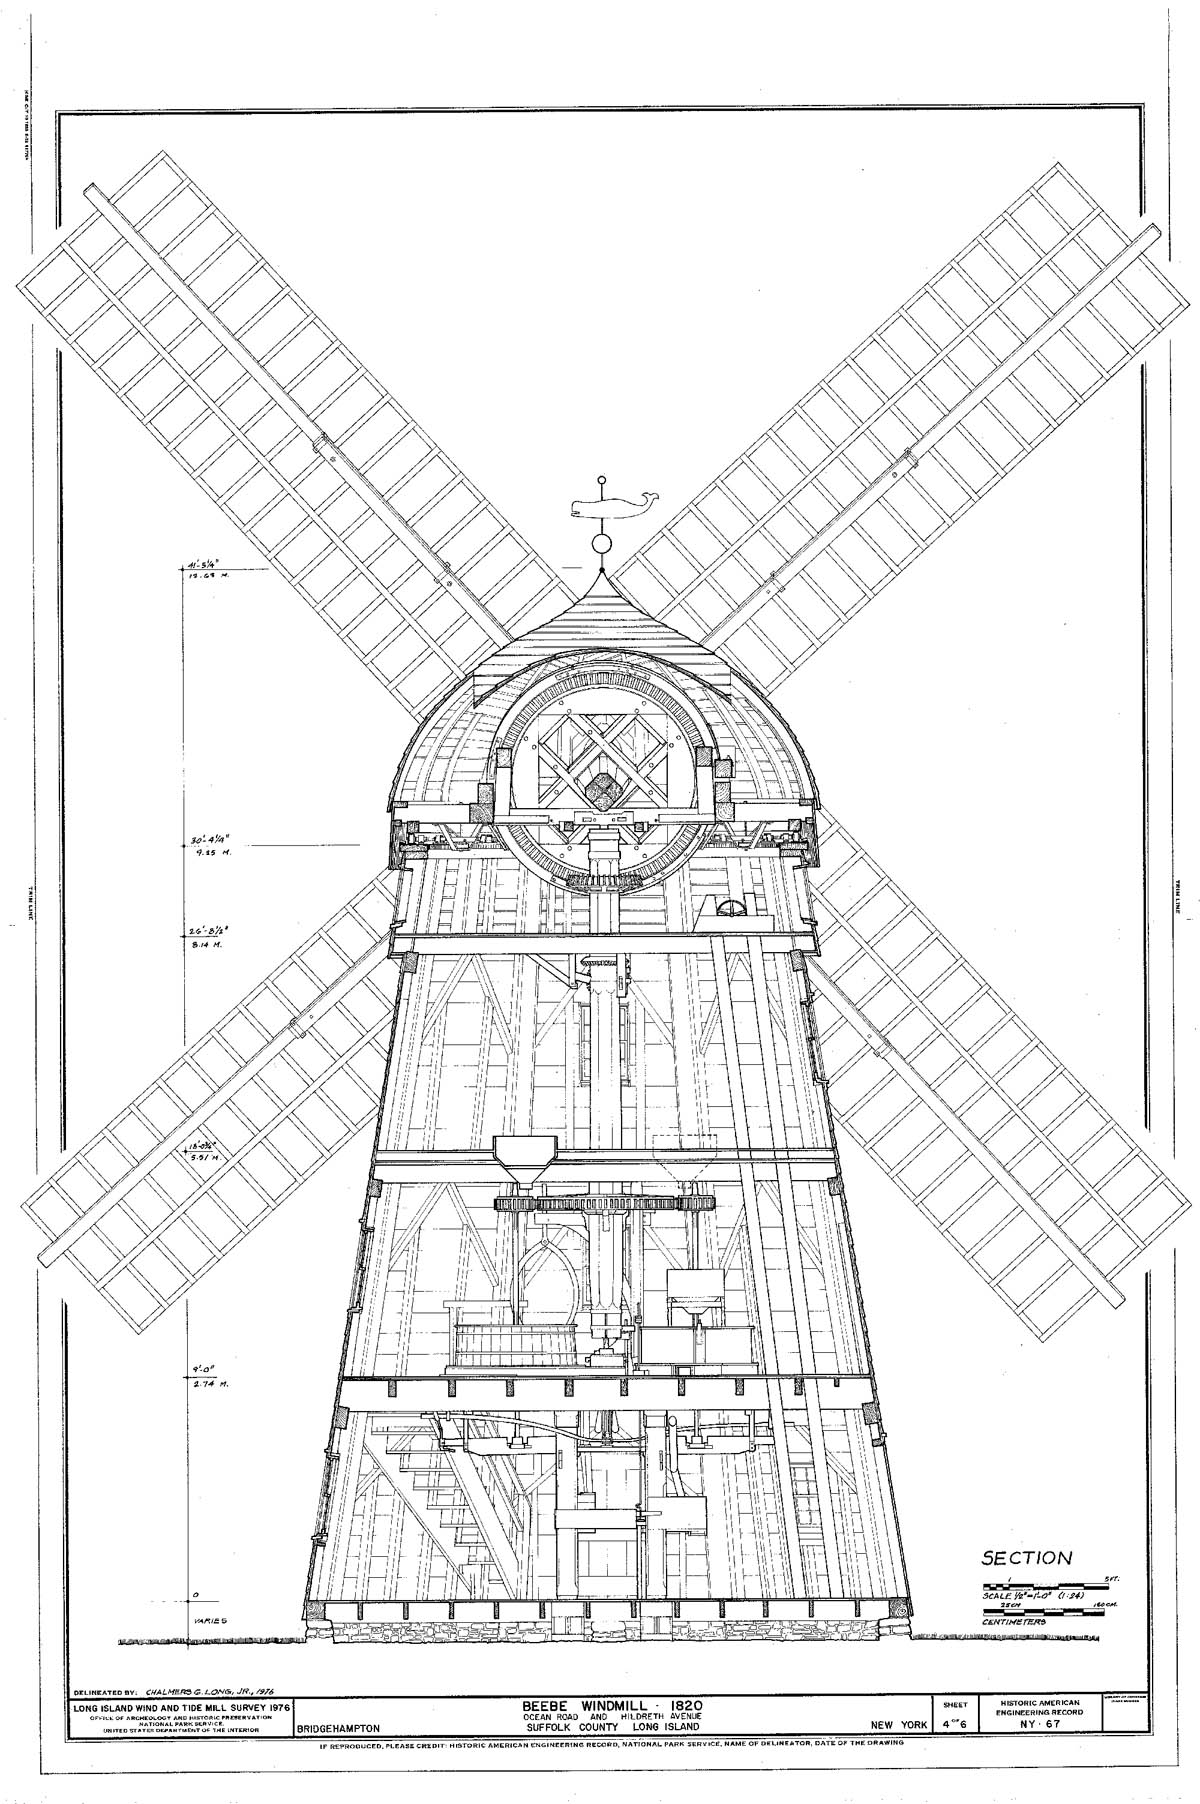 Beebe Windmill architectural drawing